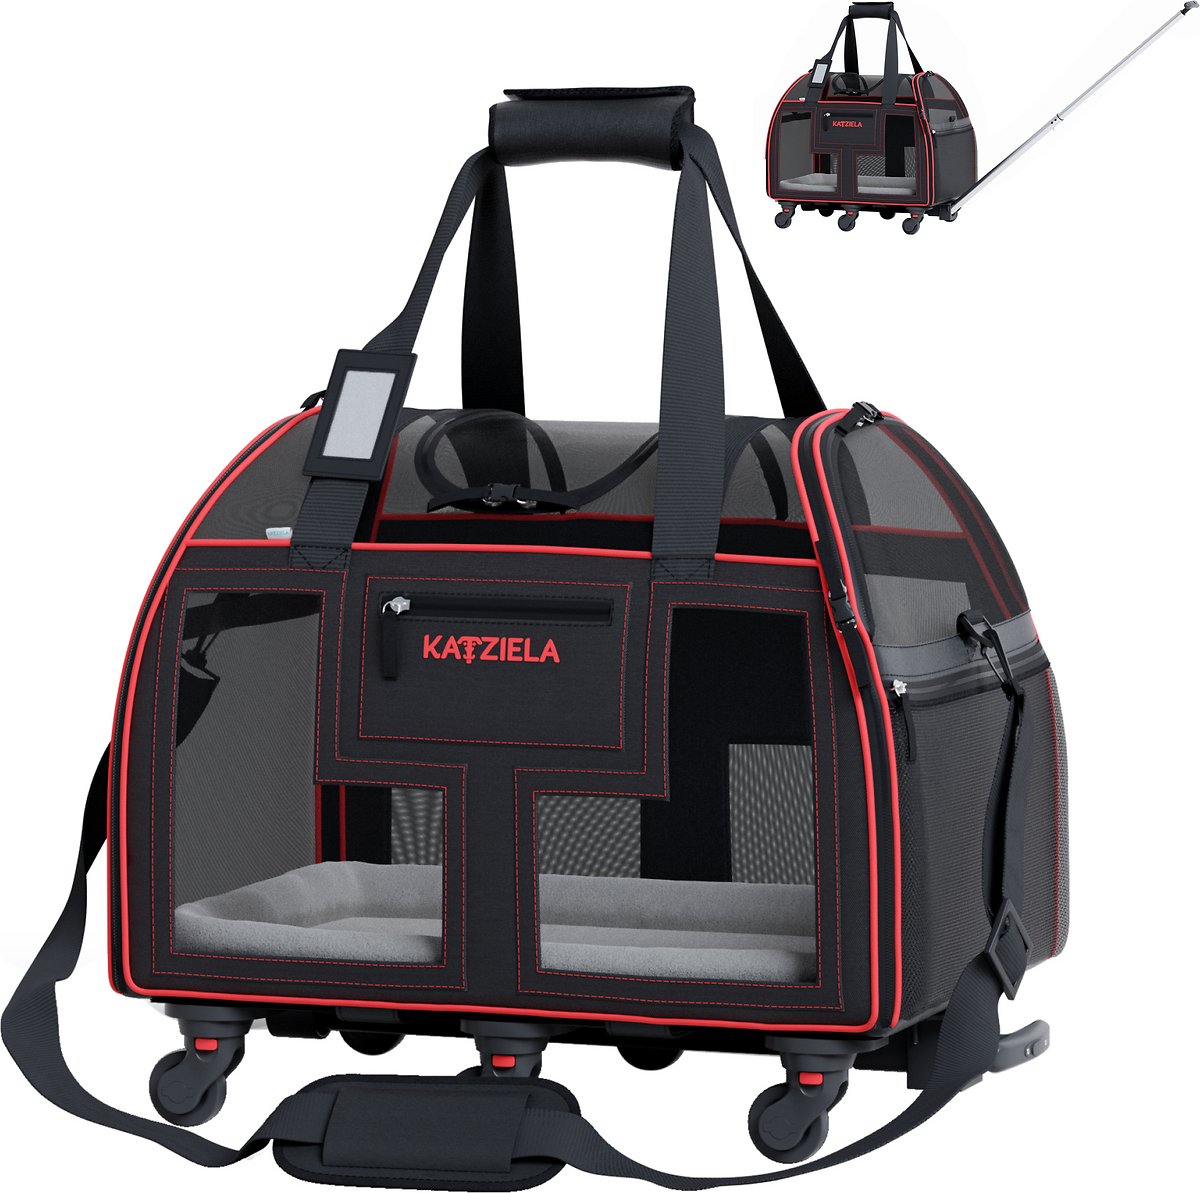 Katziela Rolling Pet Carrier Airline Approved – Pet Carrier with